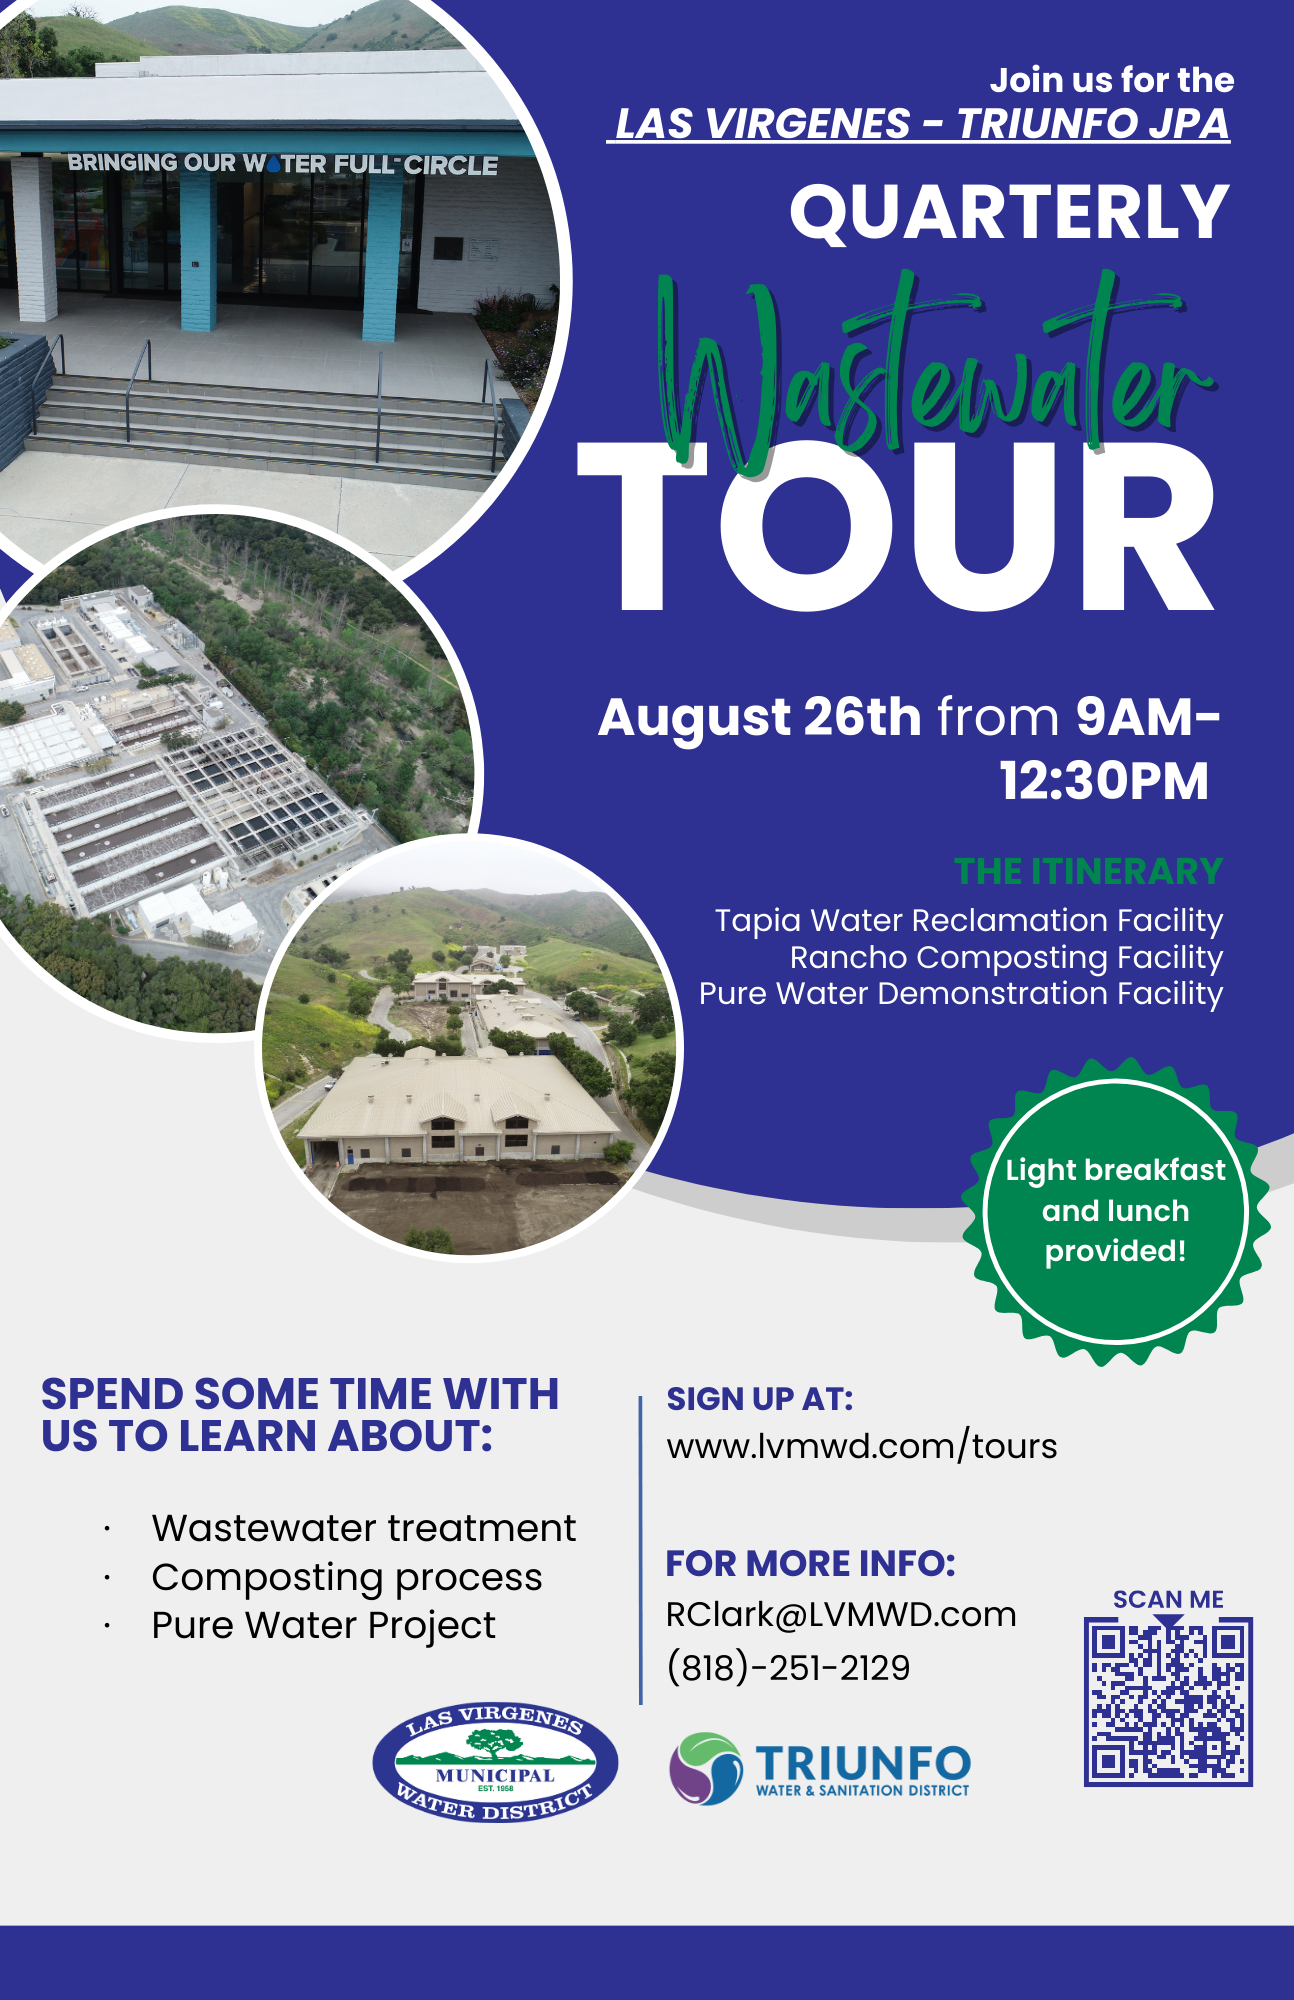 JPA Quarterly Wastewater Tour Returns! After a long hiatus due to the pandemic, Las Virgenes-Triunfo JPA is thrilled to announce the return of our Quarterly Wastewater Tour on Saturday, August 26 from 9am-12:30pm. Attendees get an inside look into the essential processes and infrastructure that maintain the health & quality of our community's environment, including a look at the new project set to bring us a local source of water by 2028. The morning will consist of tours of: • Tapia Water Reclamation Facility • Rancho Las Virgenes Composting Facility • Pure Water Demonstration Facility Of course – we wouldn’t ask you spend a few hours with us without providing food, so a light breakfast and full lunch will be provided! We will also provide transportation in between facilities. Space is limited – so secure your spot today! For more information and to register, visit: LVMWD.com/tours Thank you, and we look forward to seeing you there! 